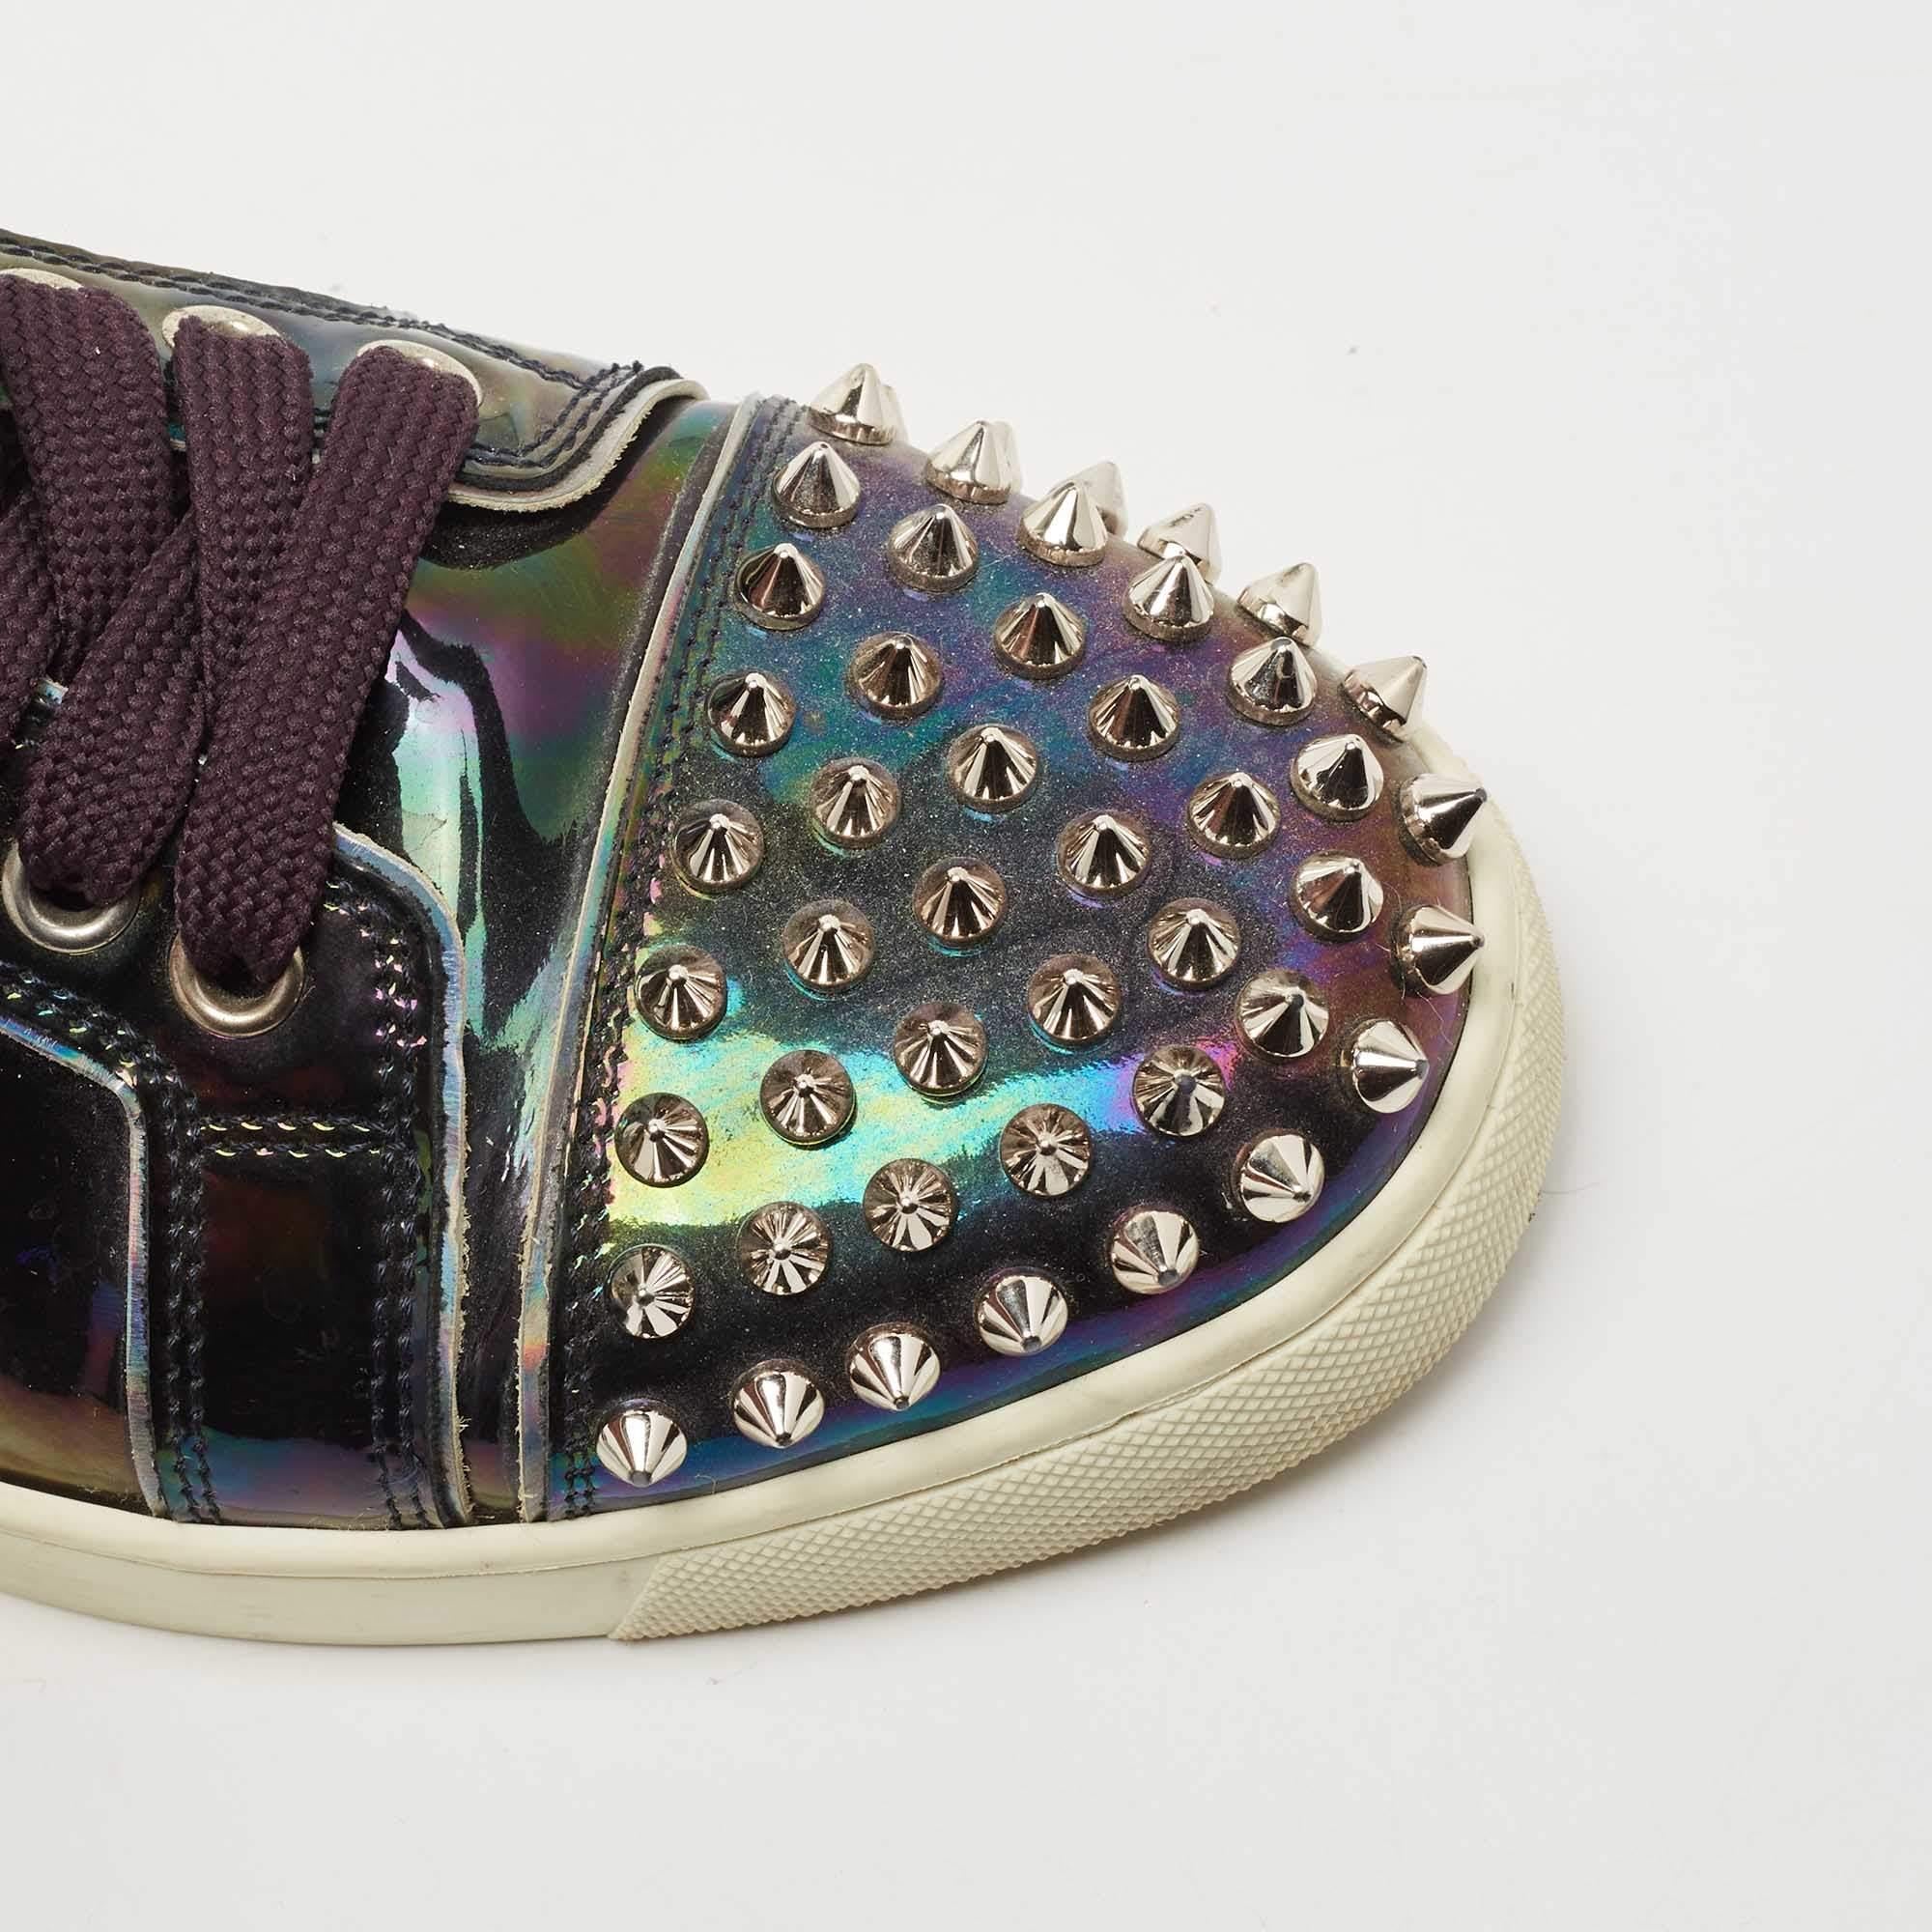 Christian Louboutin Holographic Patent veira Spike Low Top Sneakers Size 36.5 1